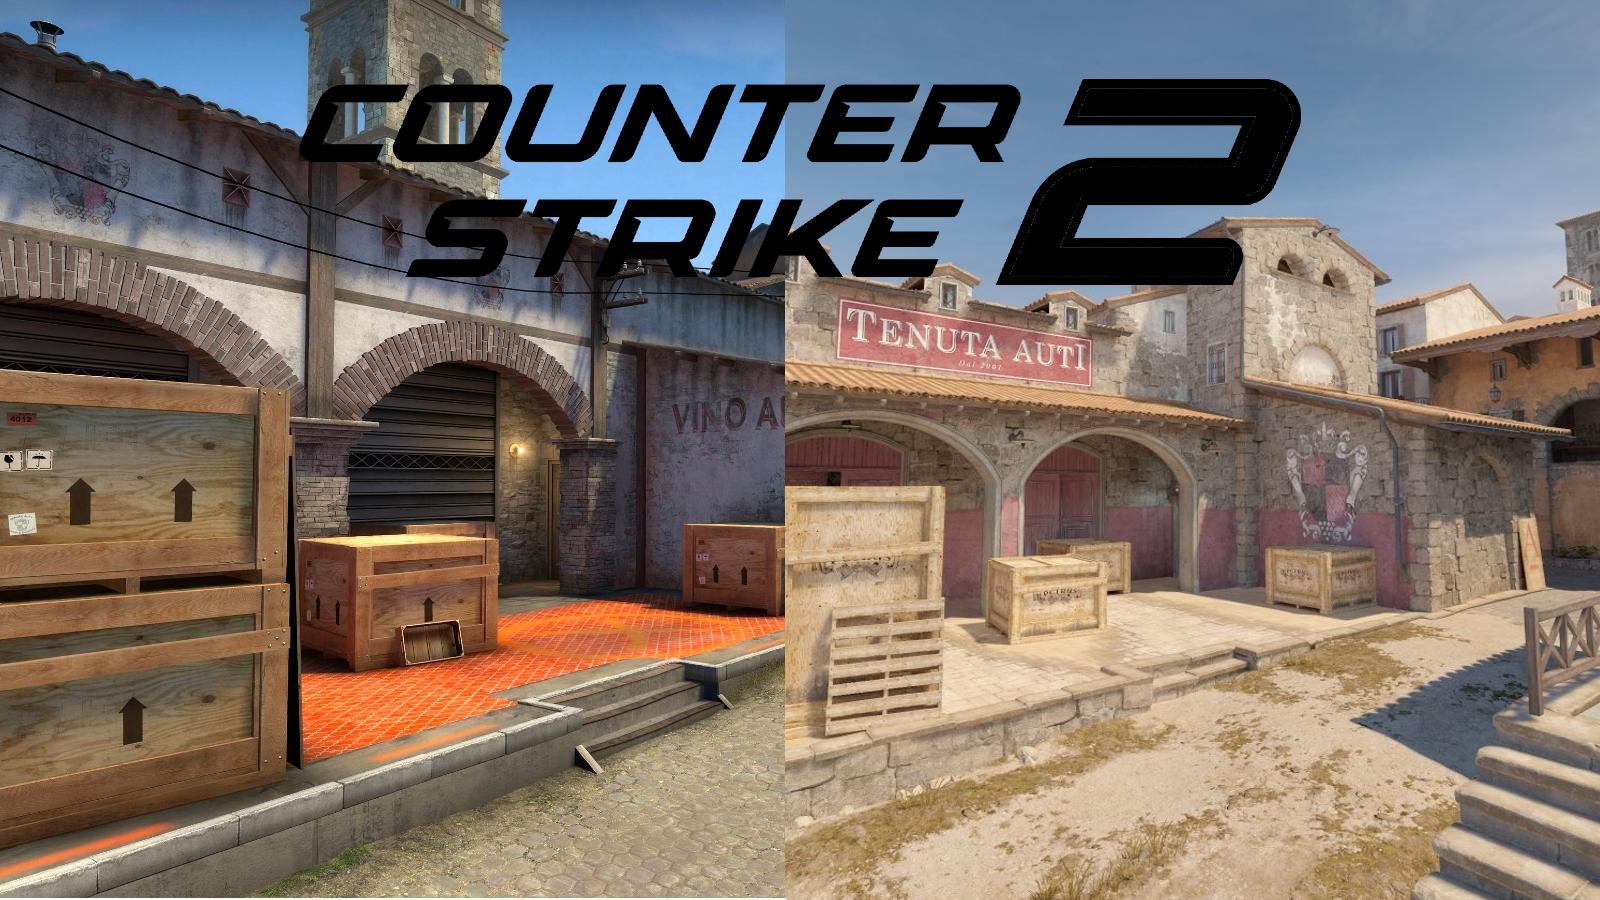 CS2 release date, skins, trailers, and Counter-Strike 2 news